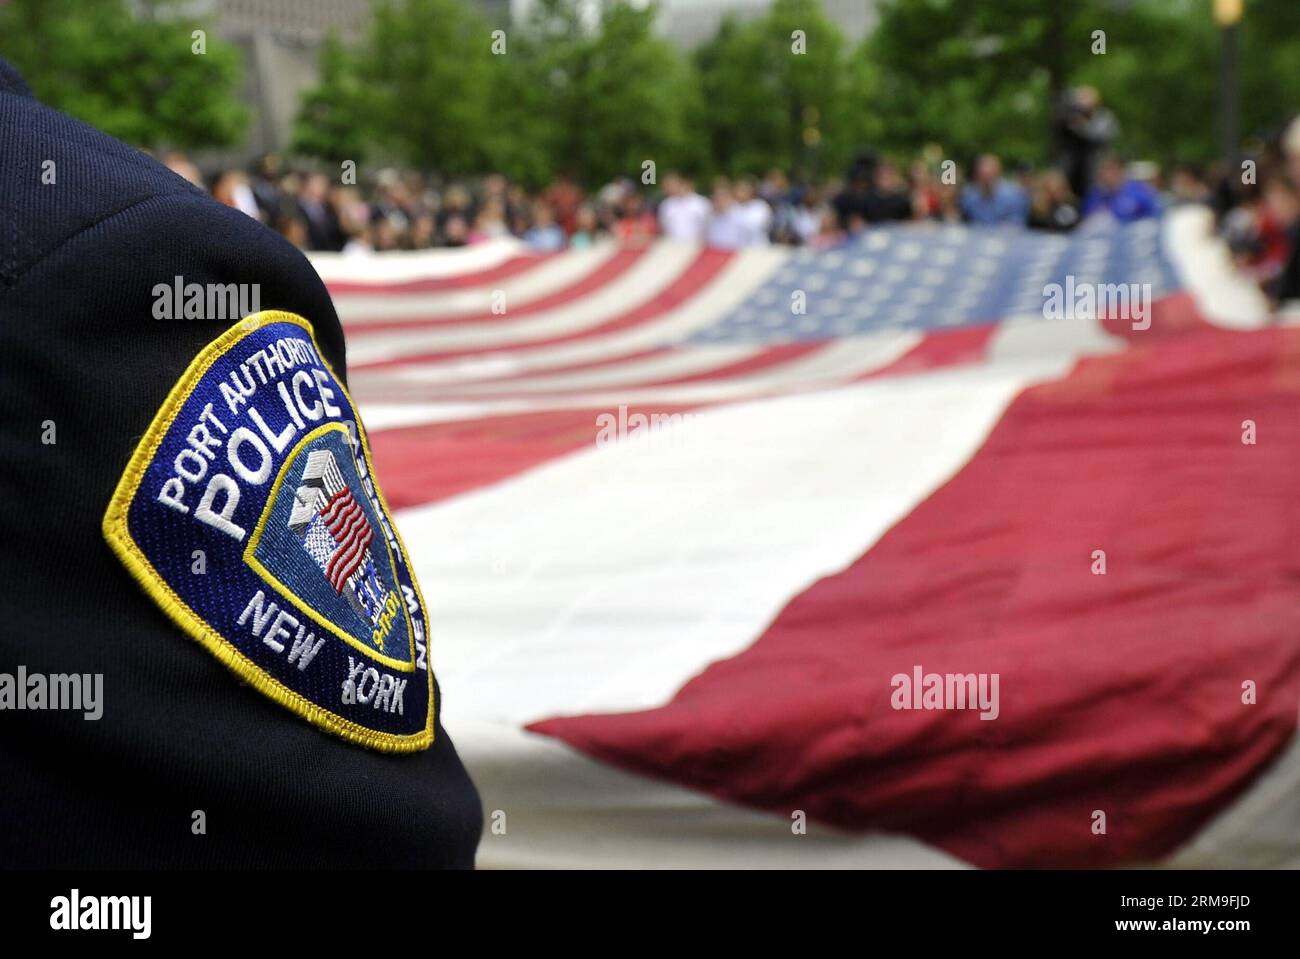 (140521) -- NEW YORK, May 21, 2014 (Xinhua) -- Firefighters, police and members of the military hold the National 9/11 Flag in front of the National September 11 Memorial Museum in New York, the United States, May 21, 2014. The memorial museum on Wednesday opened to the general public after a ceremonial transfer of the National 9/11 Flag, an American flag that had flown at 90 West Street, adjacent to Ground Zero, for weeks after the attacks, into the museum s permanent collection. (Xinhua/Wang Lei) US-NEW YORK-SEPT. 11 MEMORIAL MUSEUM-OPENING TO PUBLIC PUBLICATIONxNOTxINxCHN   New York May 21 Stock Photo